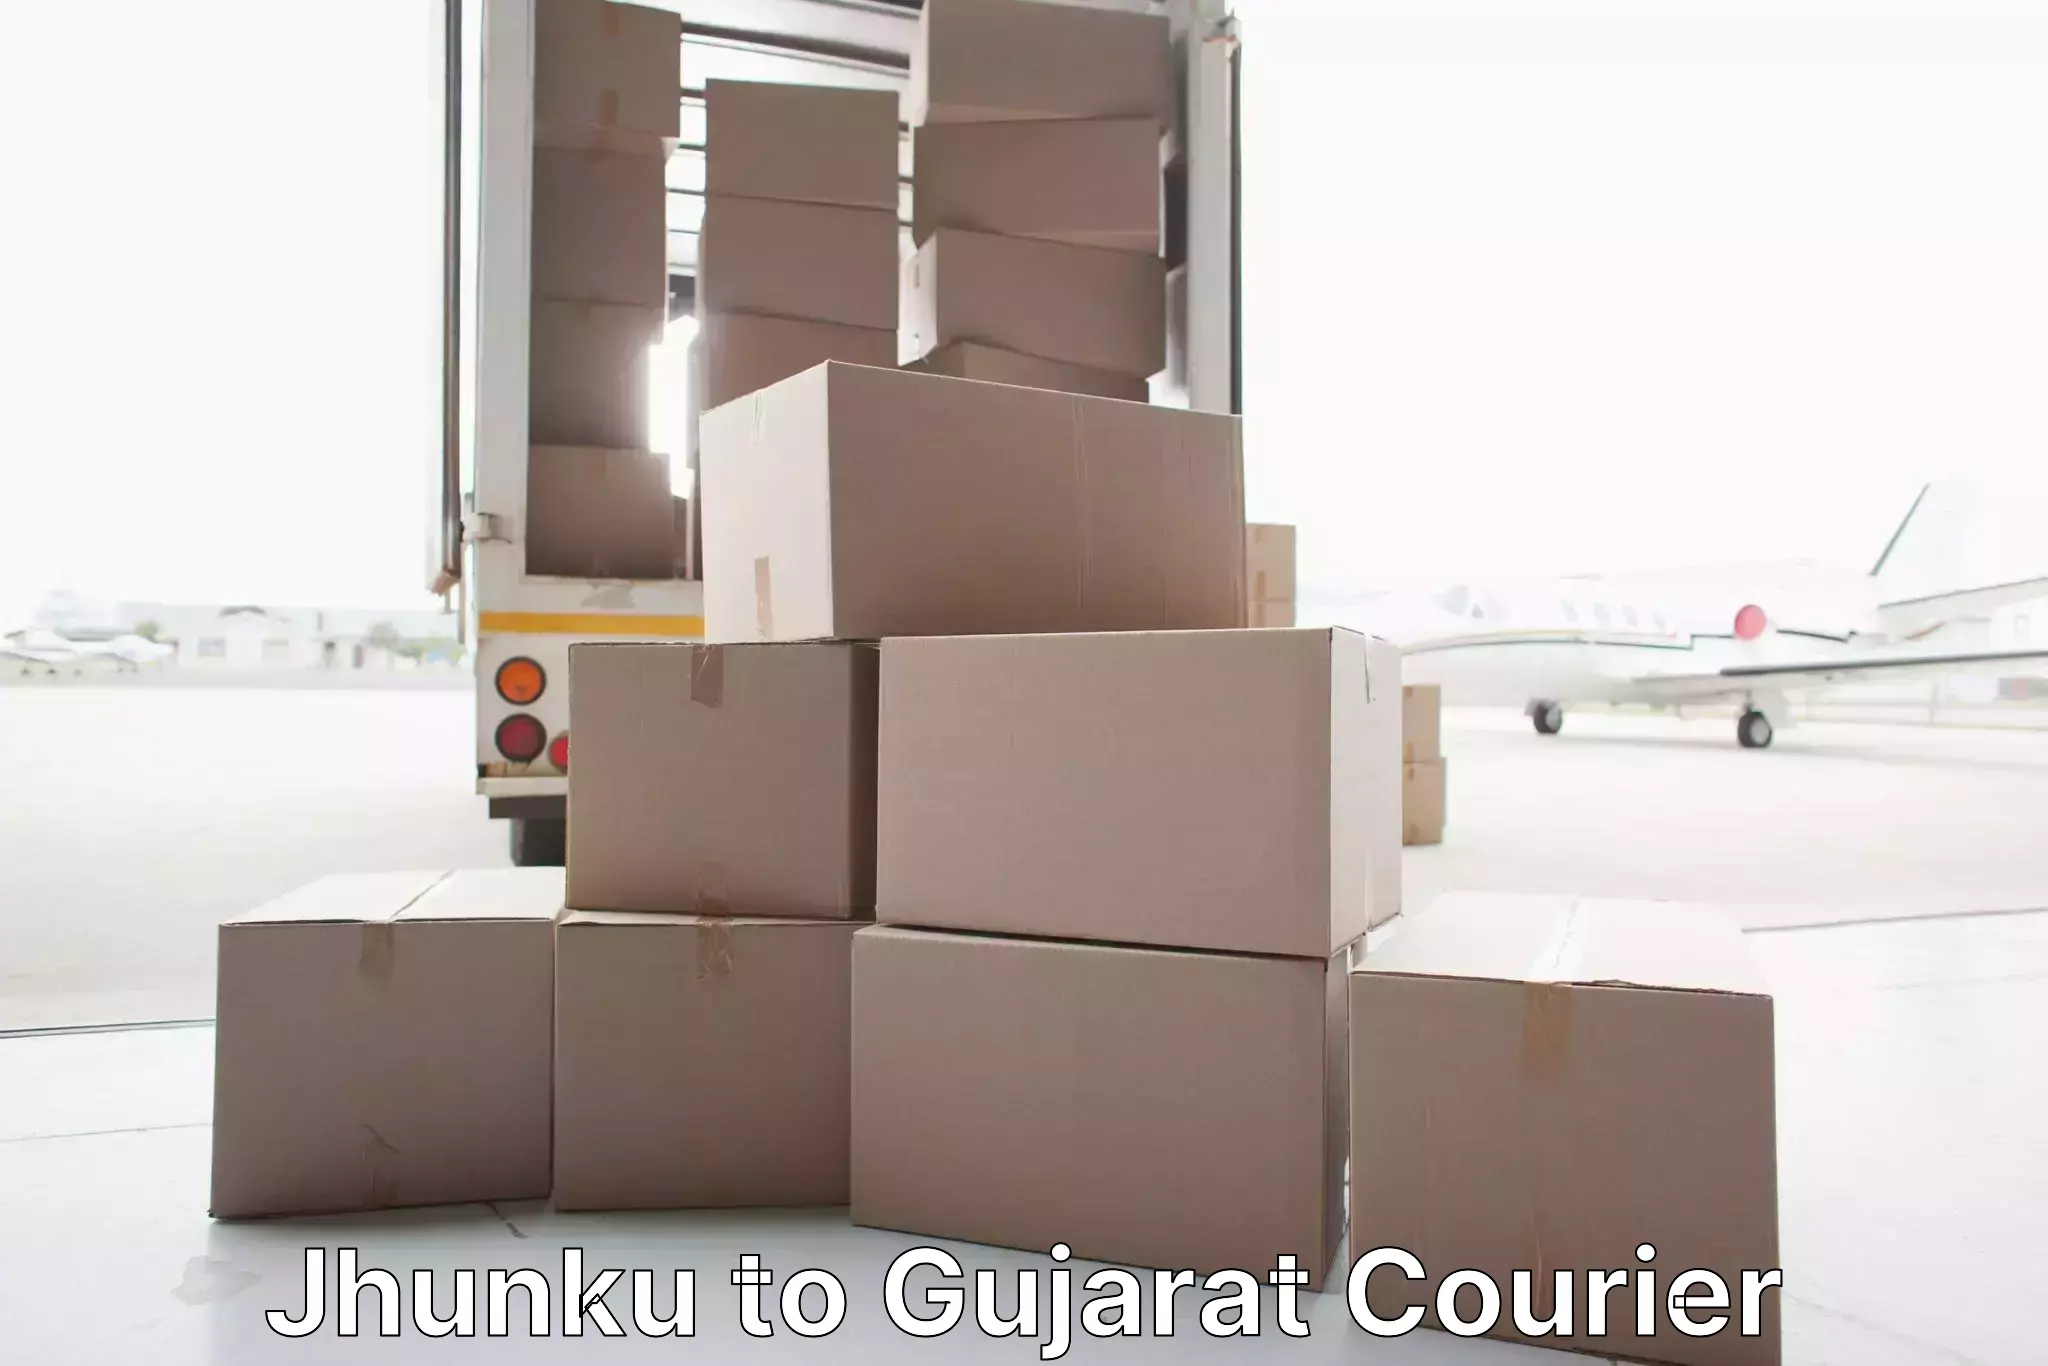 Furniture delivery service Jhunku to Kachchh